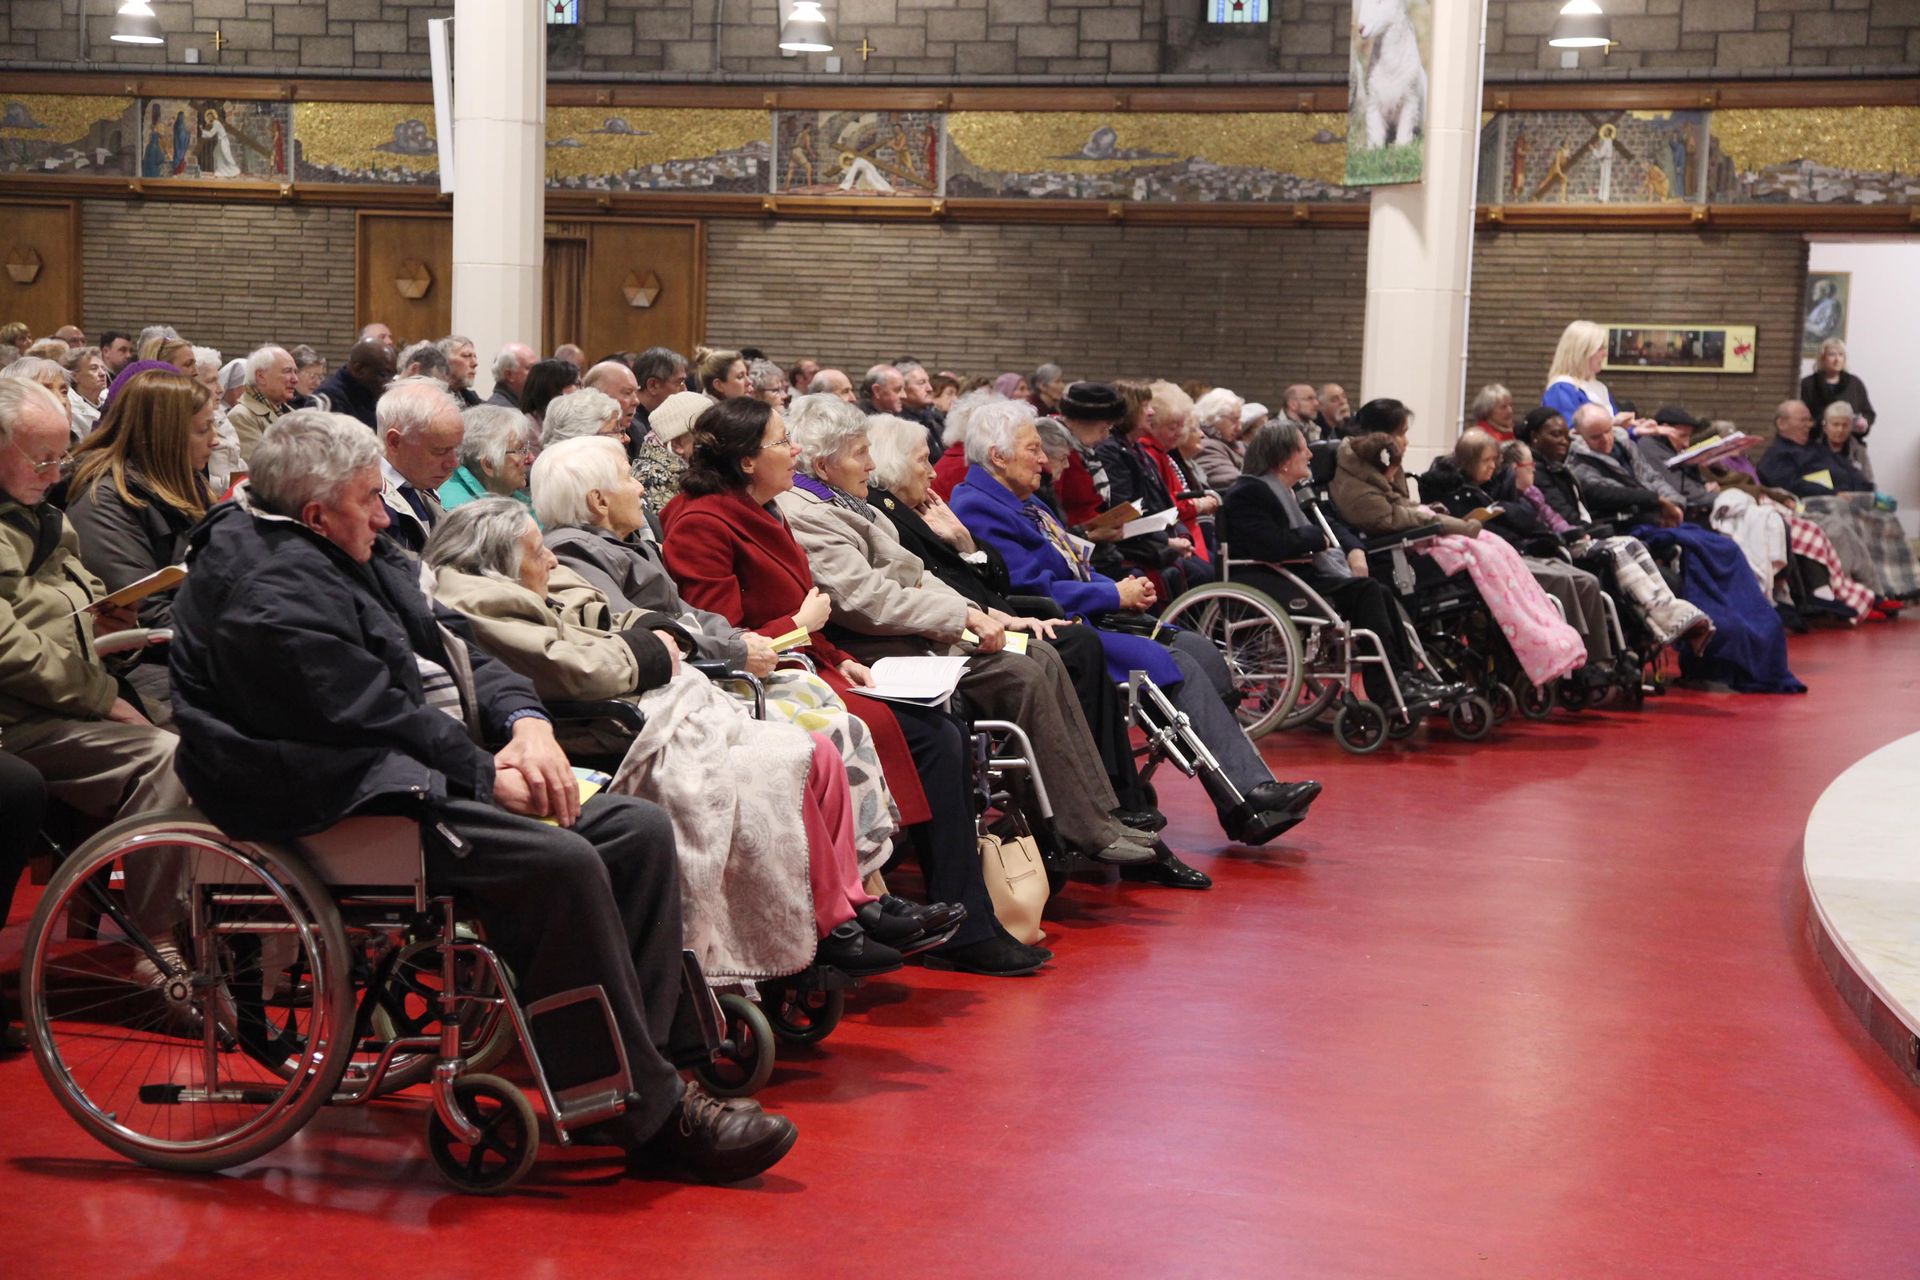 A large group of people in wheelchairs are sitting in a room.